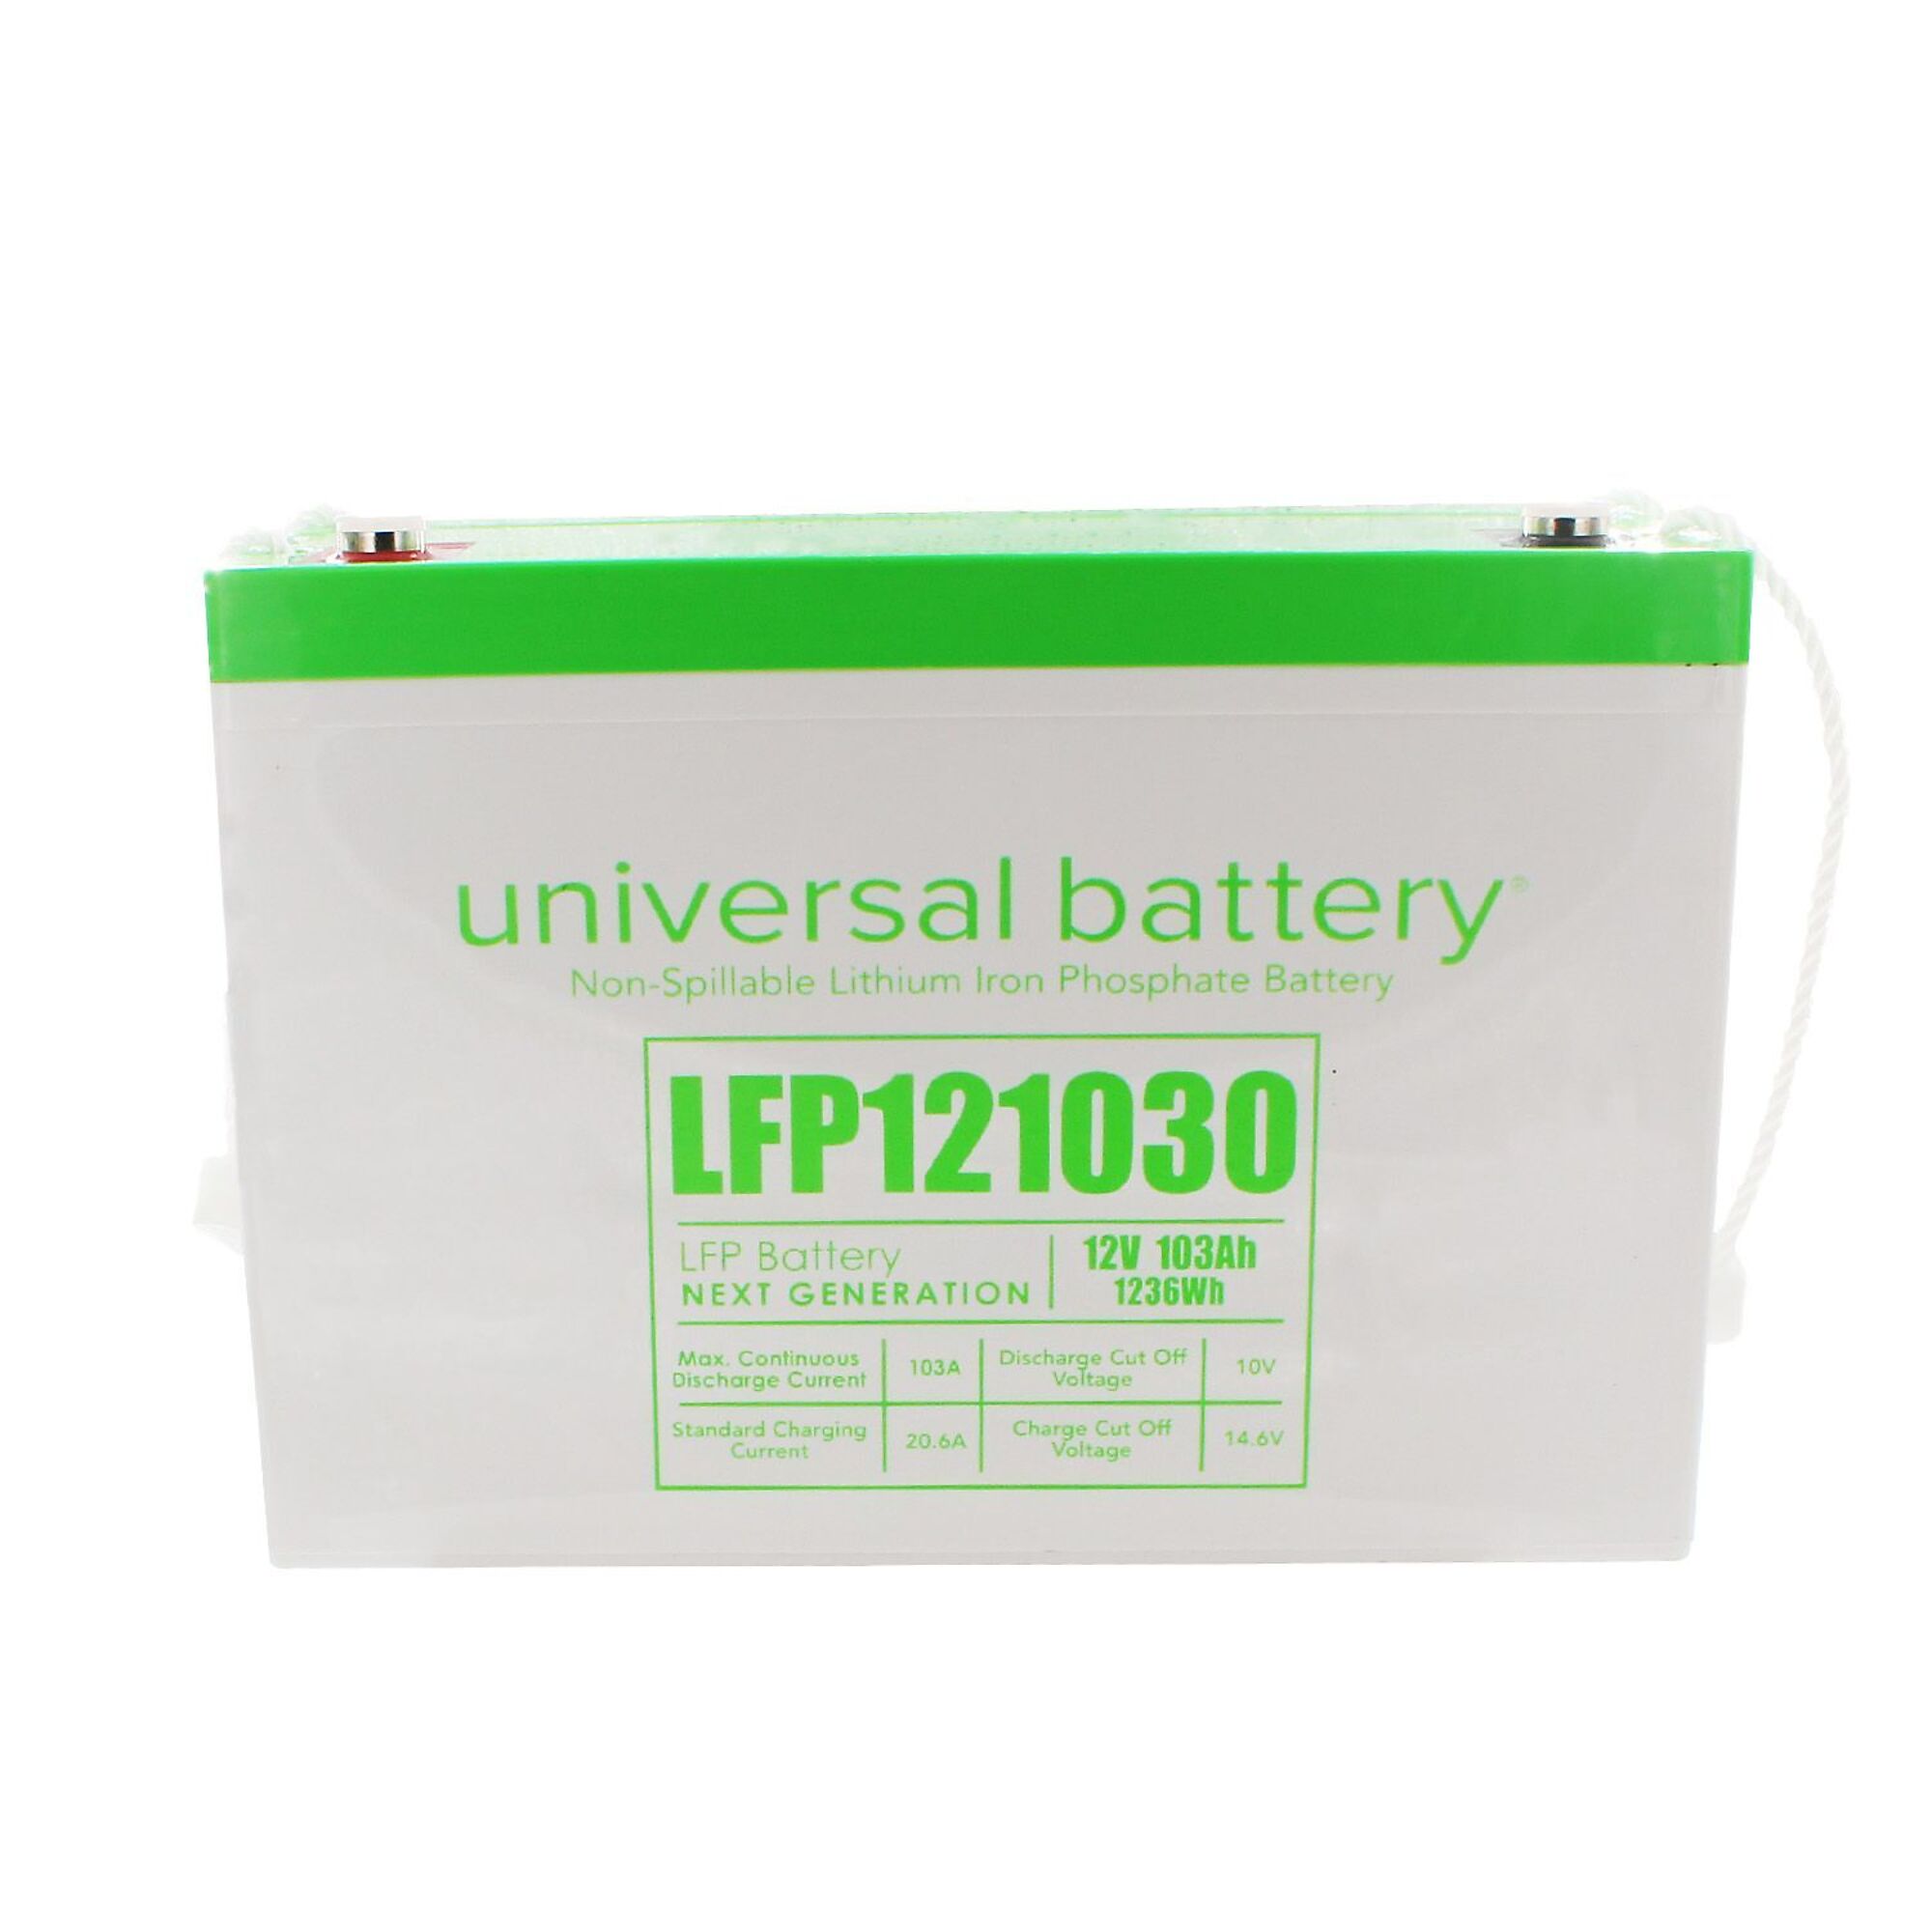 UPG, 12.8V 103Ah in Group 27 Case Internal Thread LFP Battery, Volts 12 Amp Hours 103 Battery Power Type Lithium, Model 48040